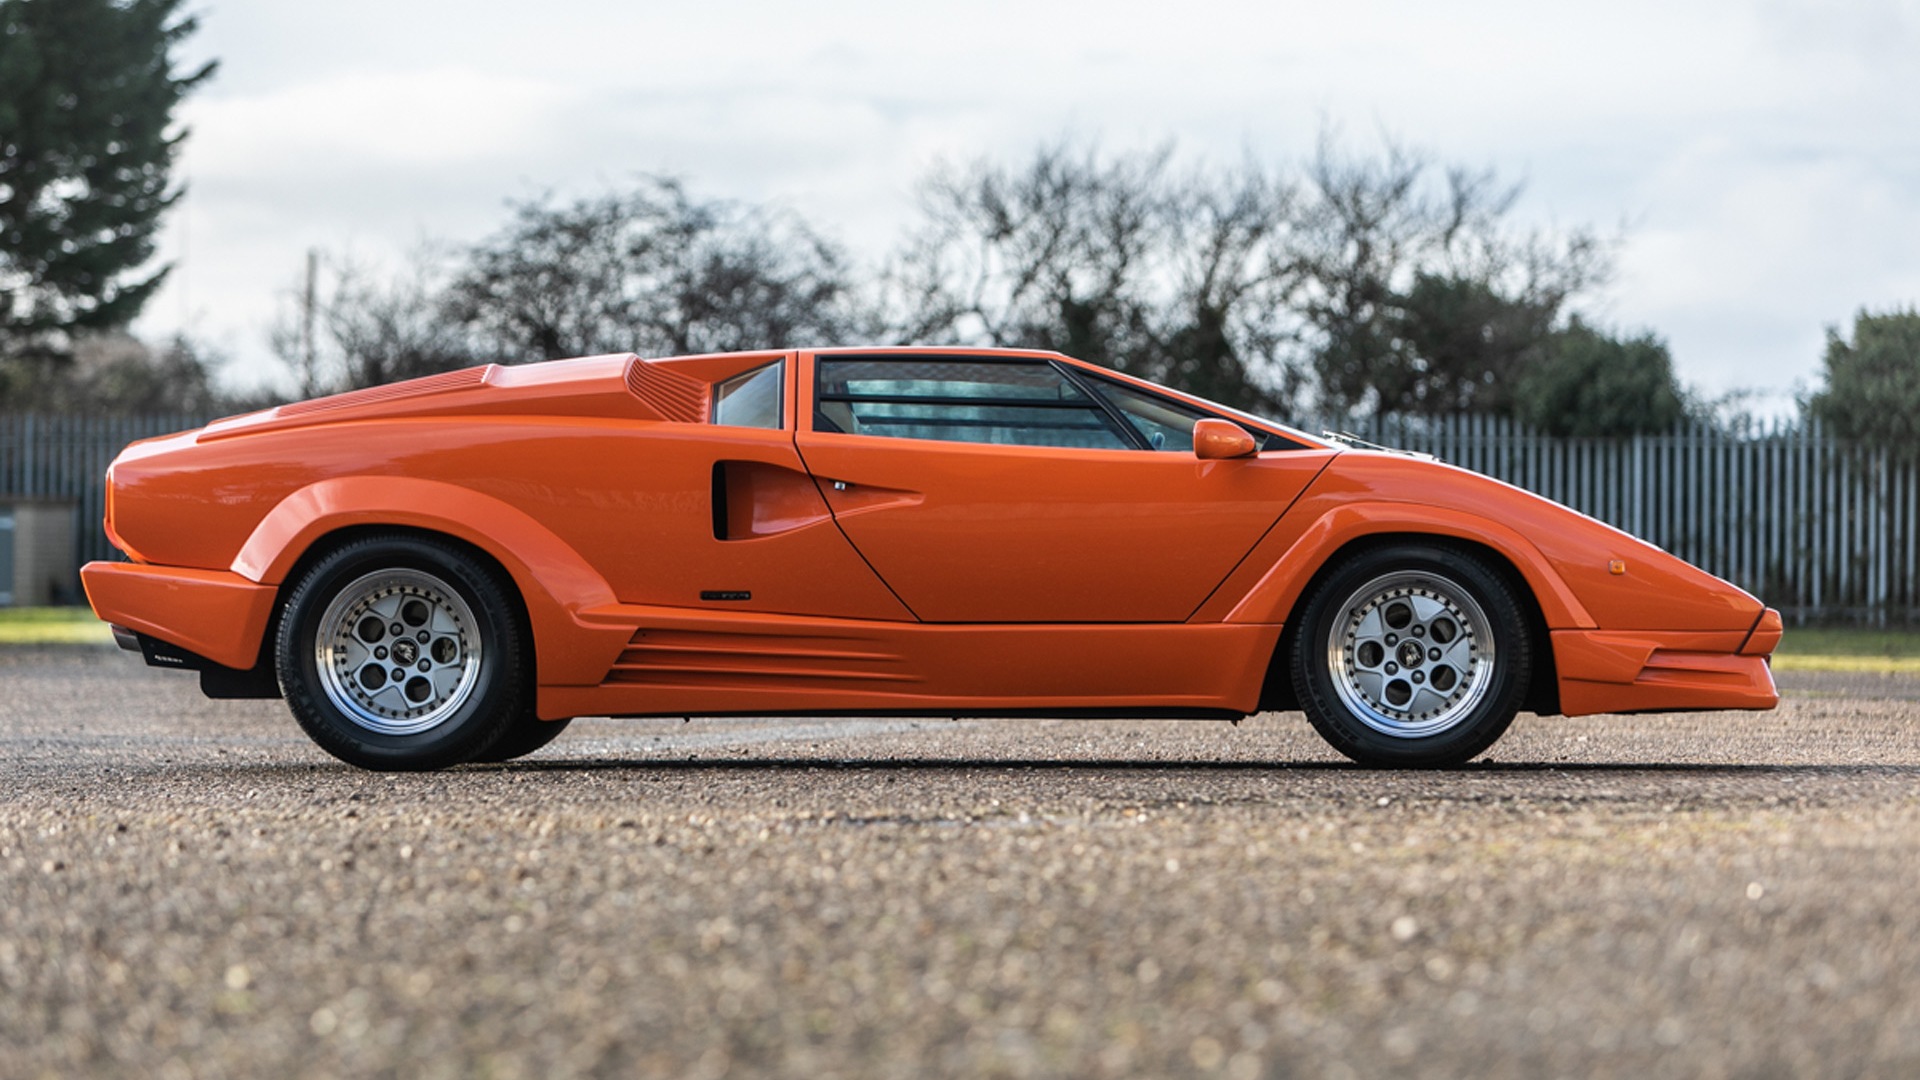 One Owner Lamborghini Countach 25th Anniversary Edition Heads To Auction